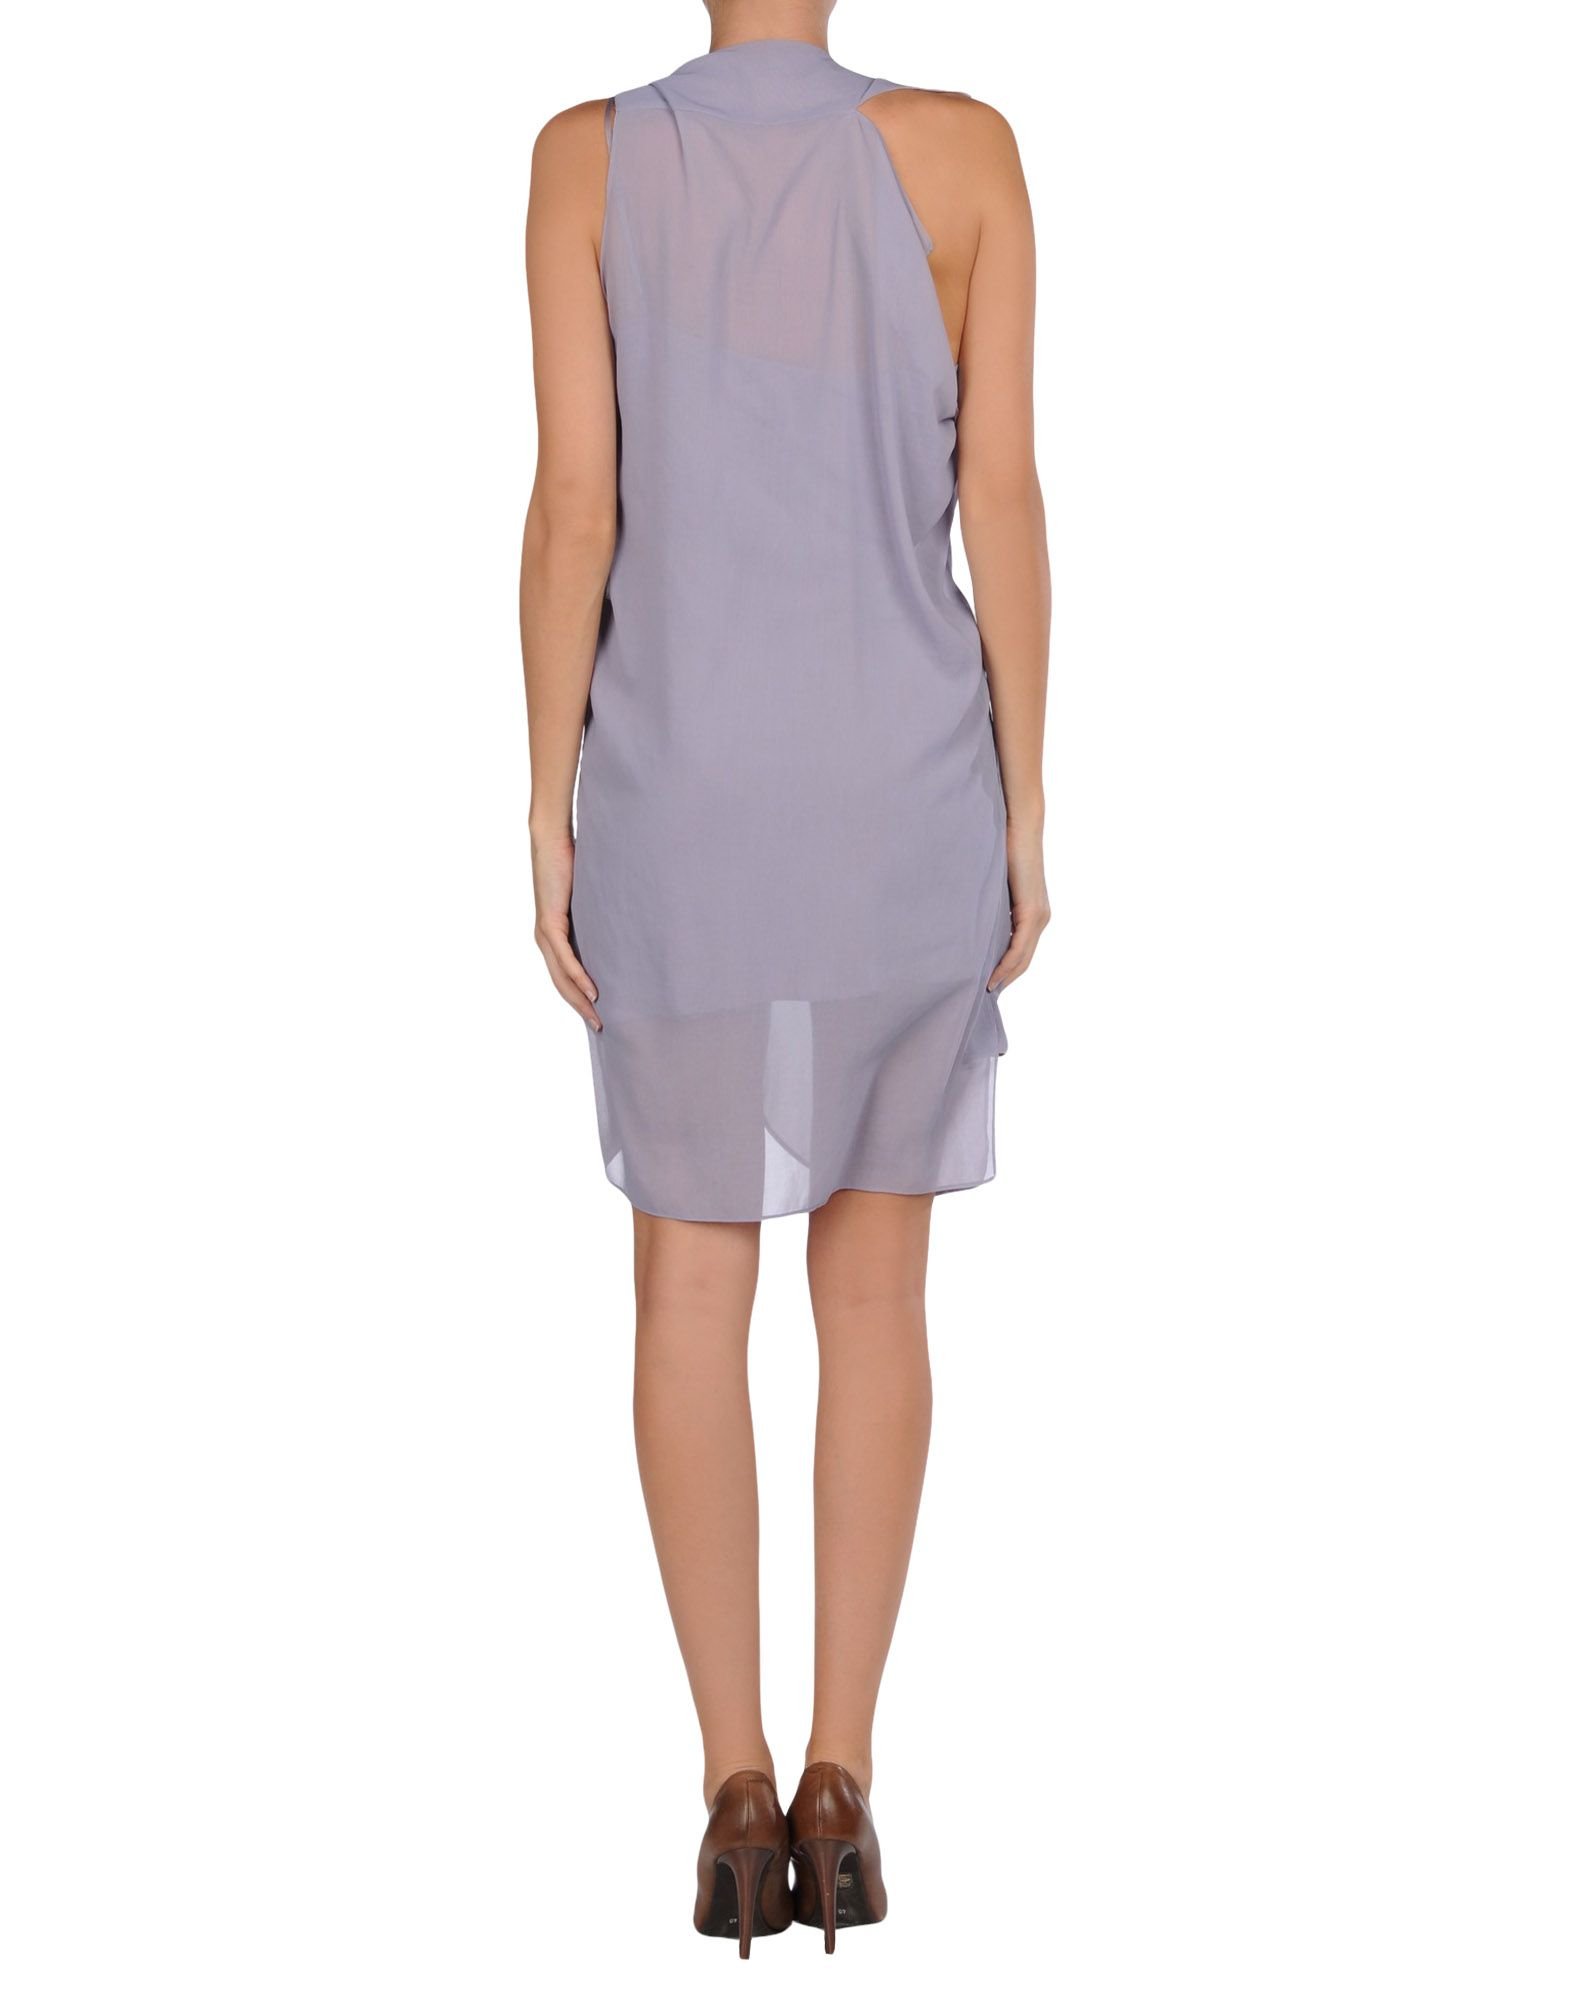 Acne Studios Synthetic Short Dress in Lilac (Purple) - Lyst